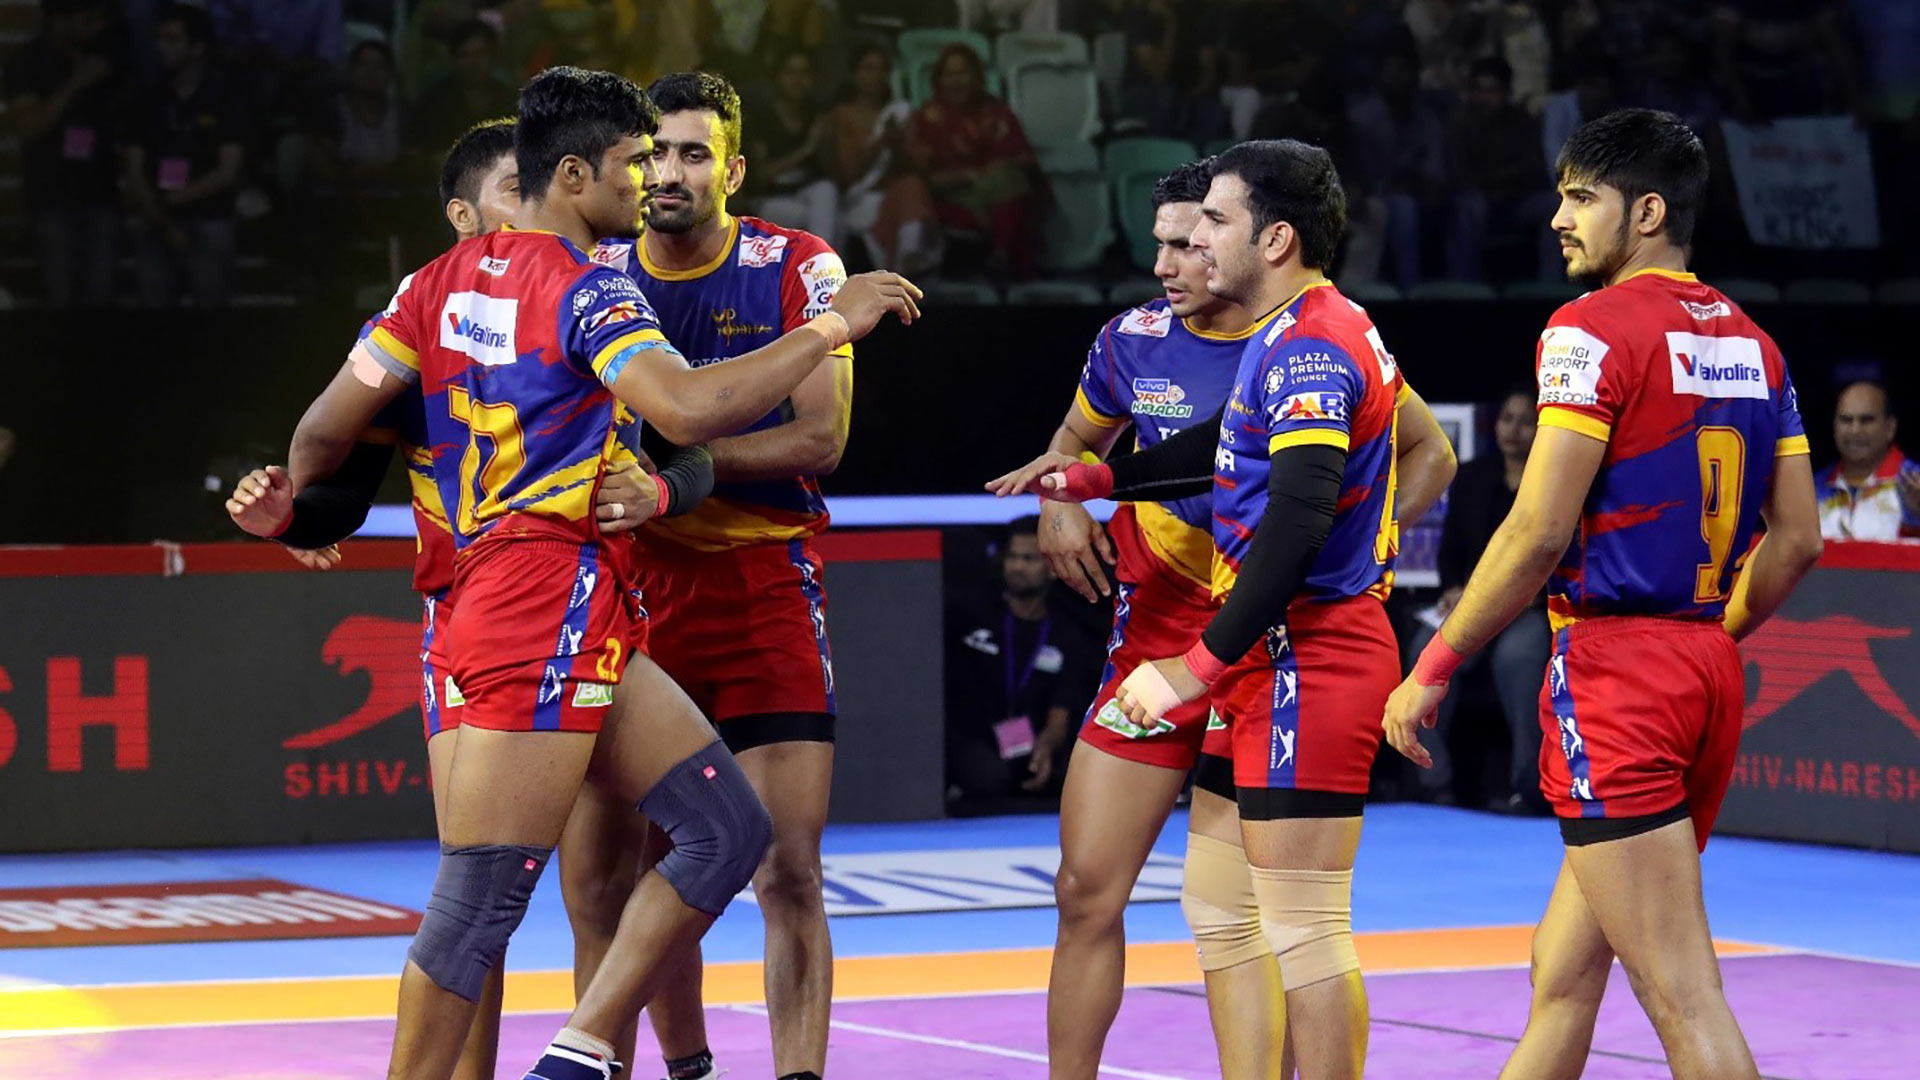 PKL 2019 | UP Yoddha played better in offence and defence, says Manpreet Singh